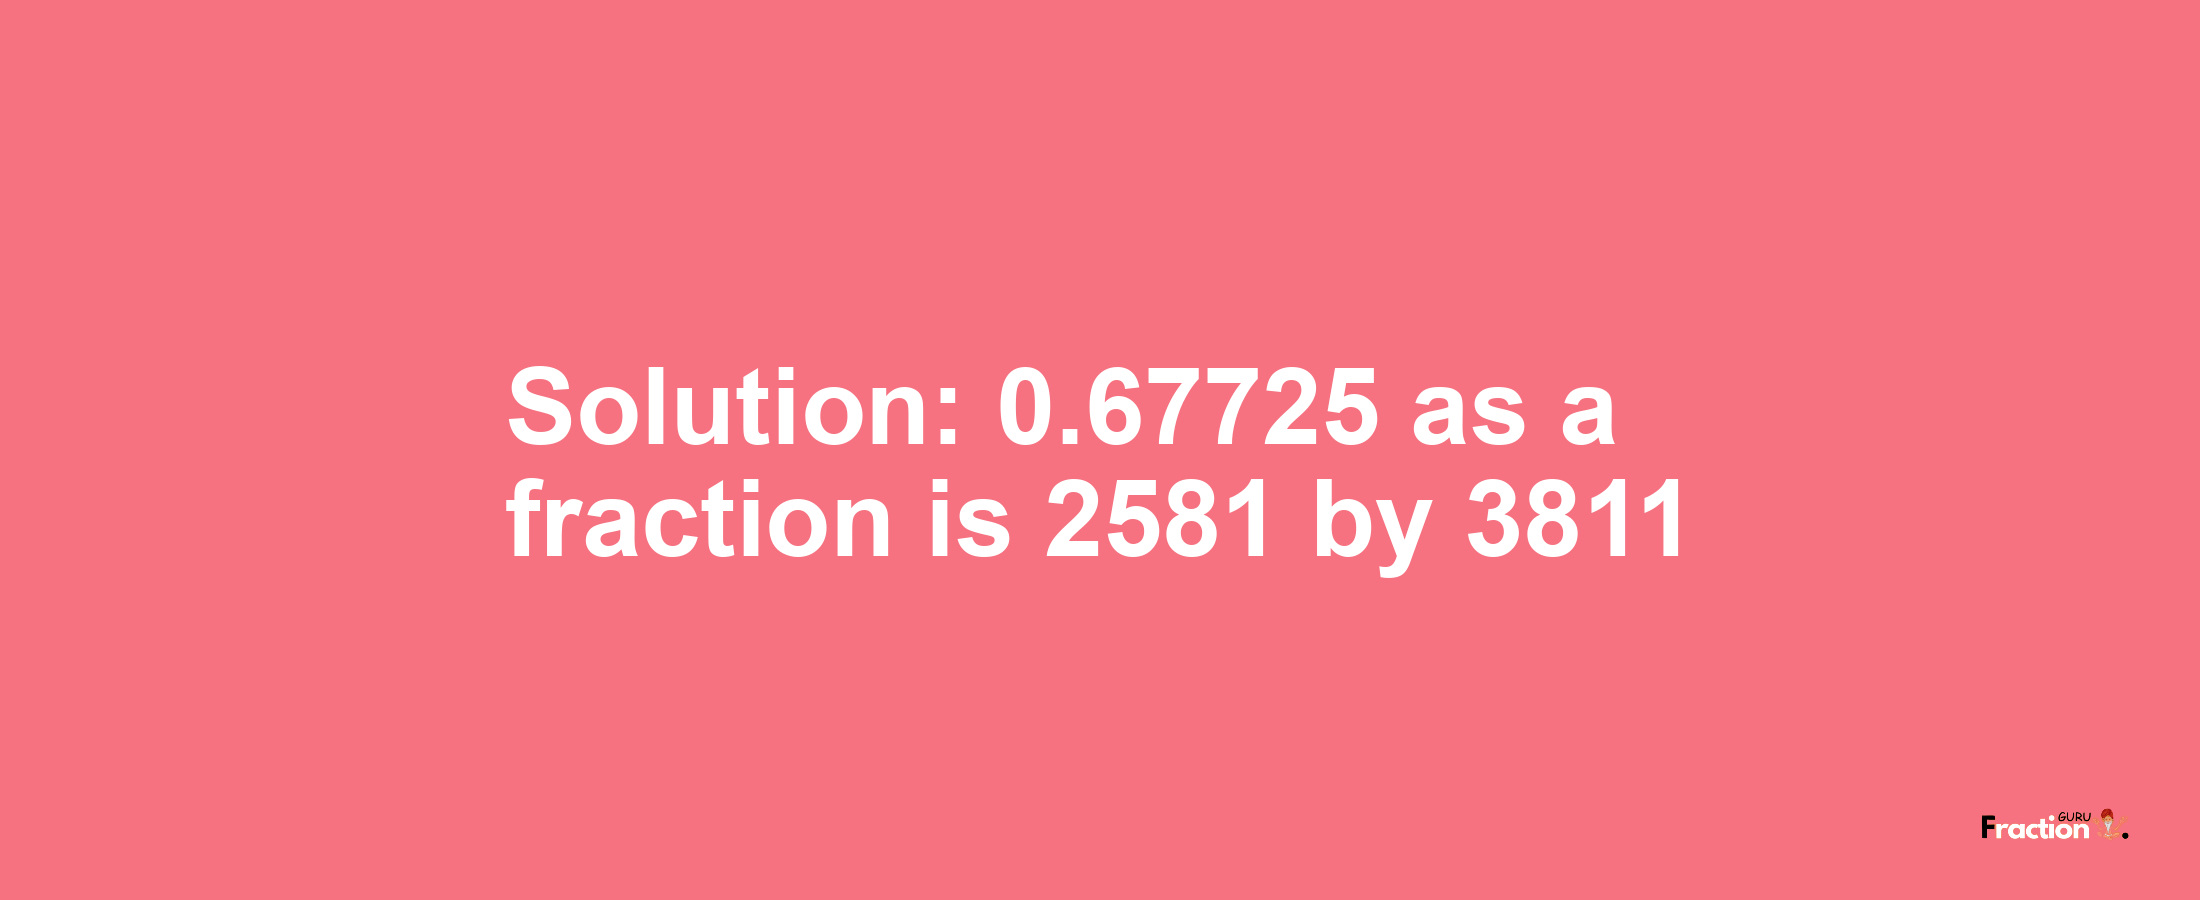 Solution:0.67725 as a fraction is 2581/3811